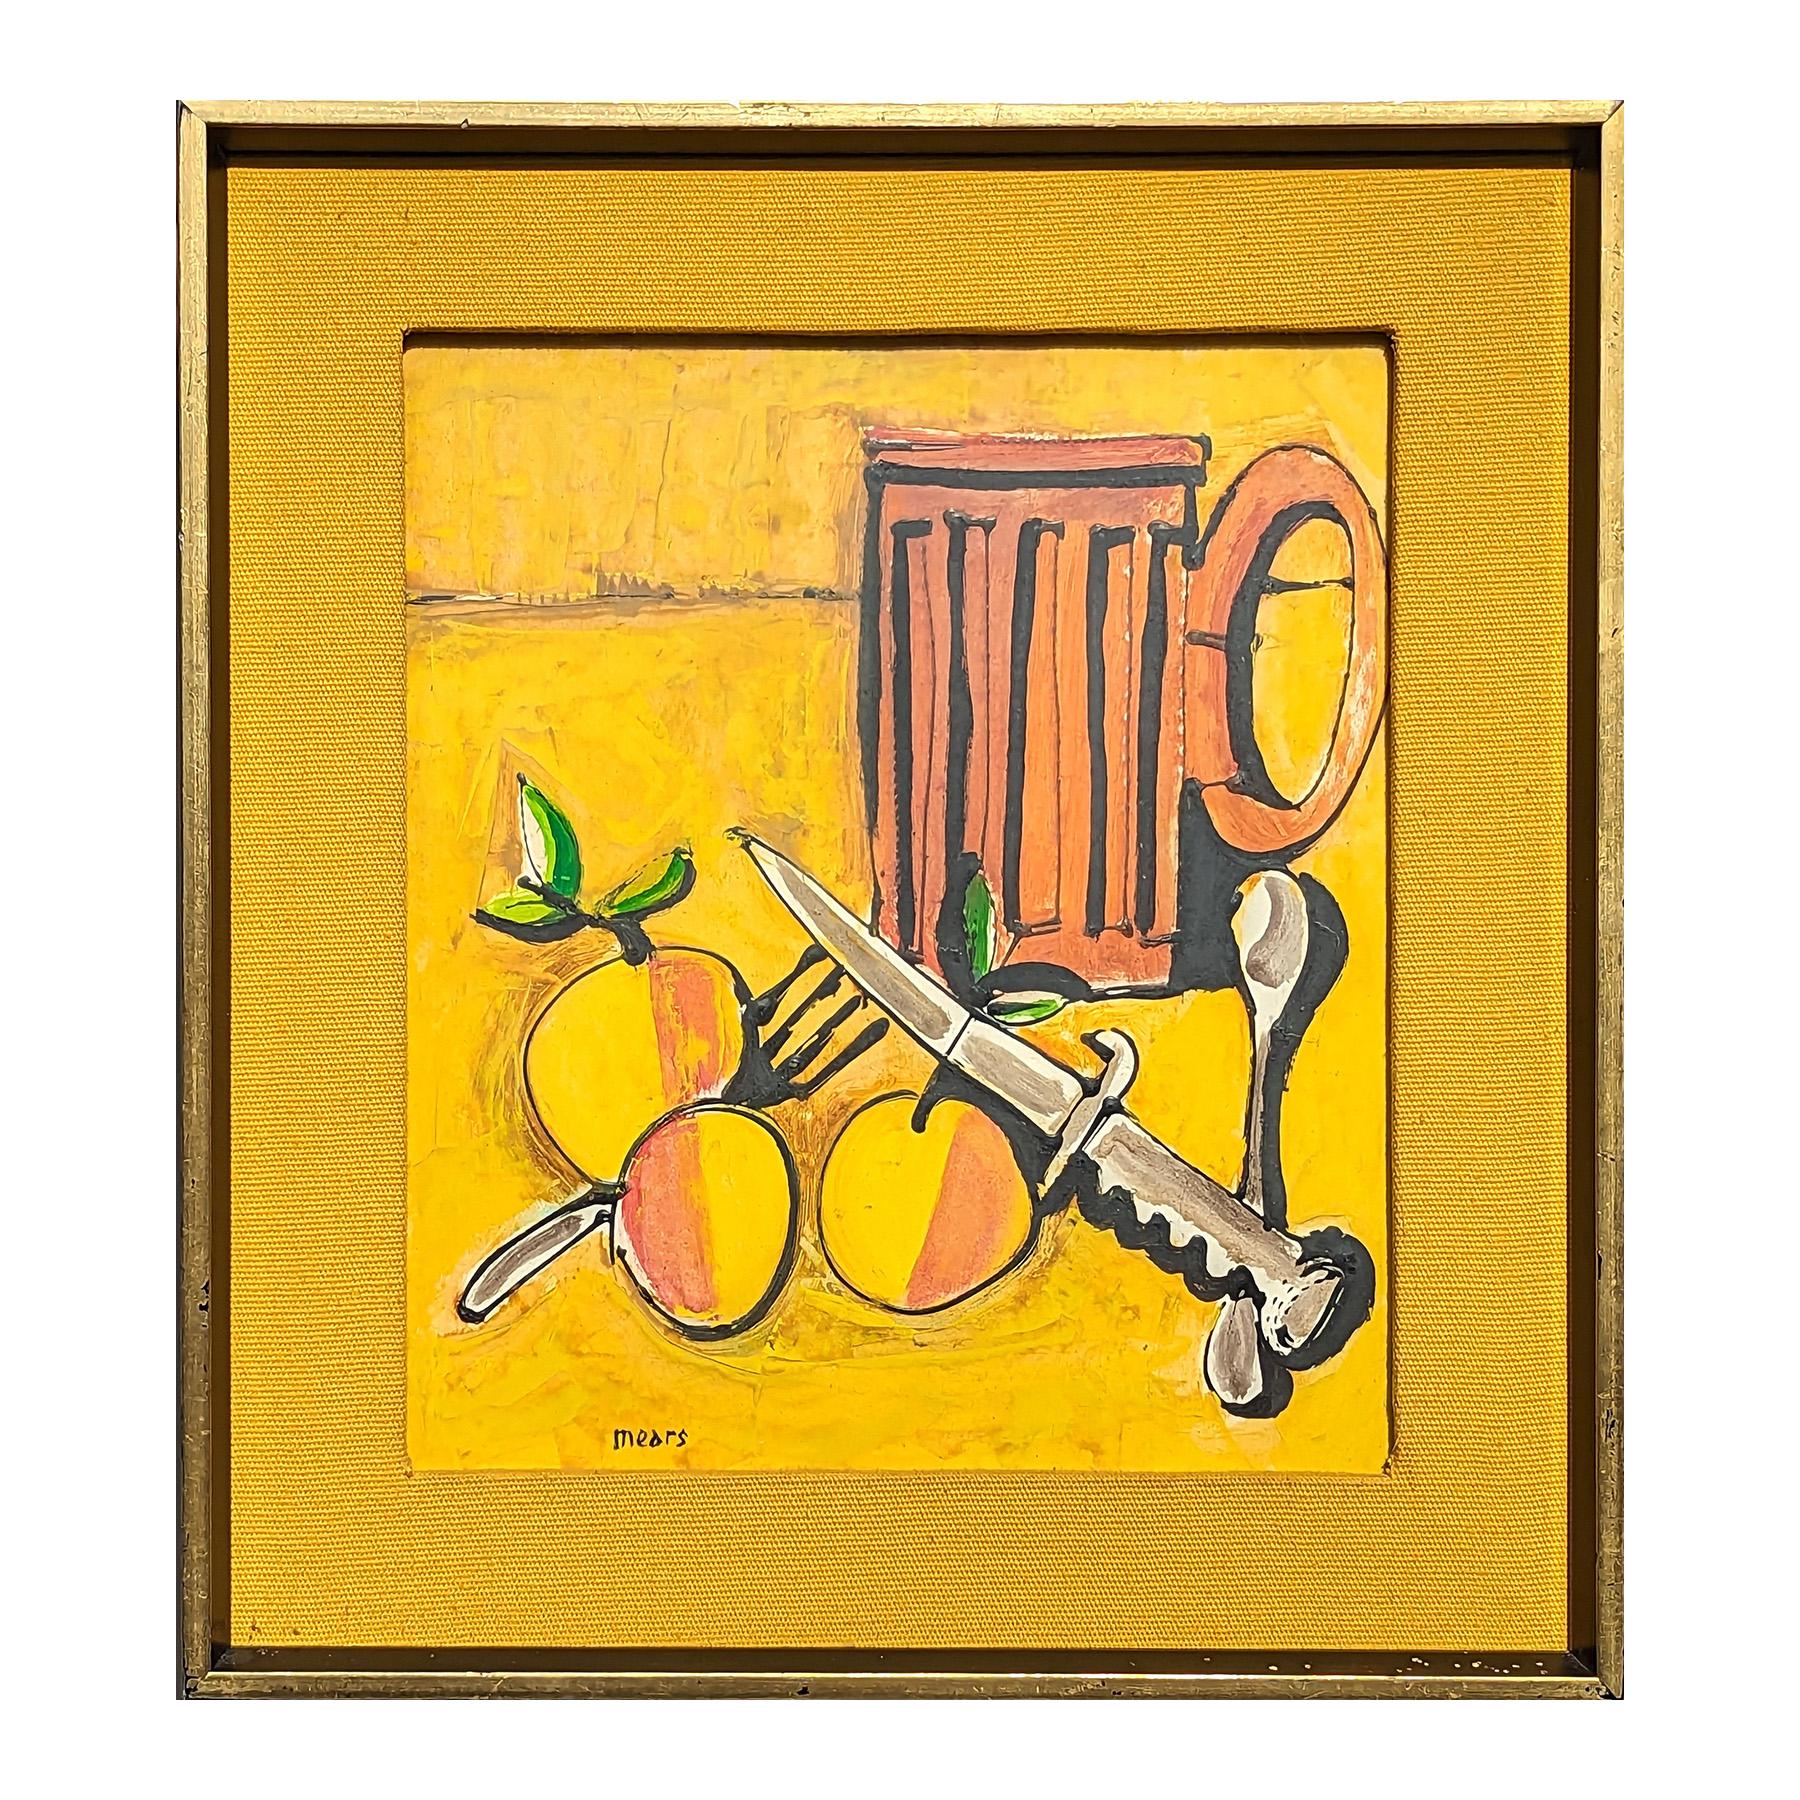 Modern abstract yellow toned still life painting by Texas artist Herb Mears. The work features a collection of fruit, a knife, and a mug set against a yellow background. Signed in the front lower left corner. Currently hung in a gold frame with